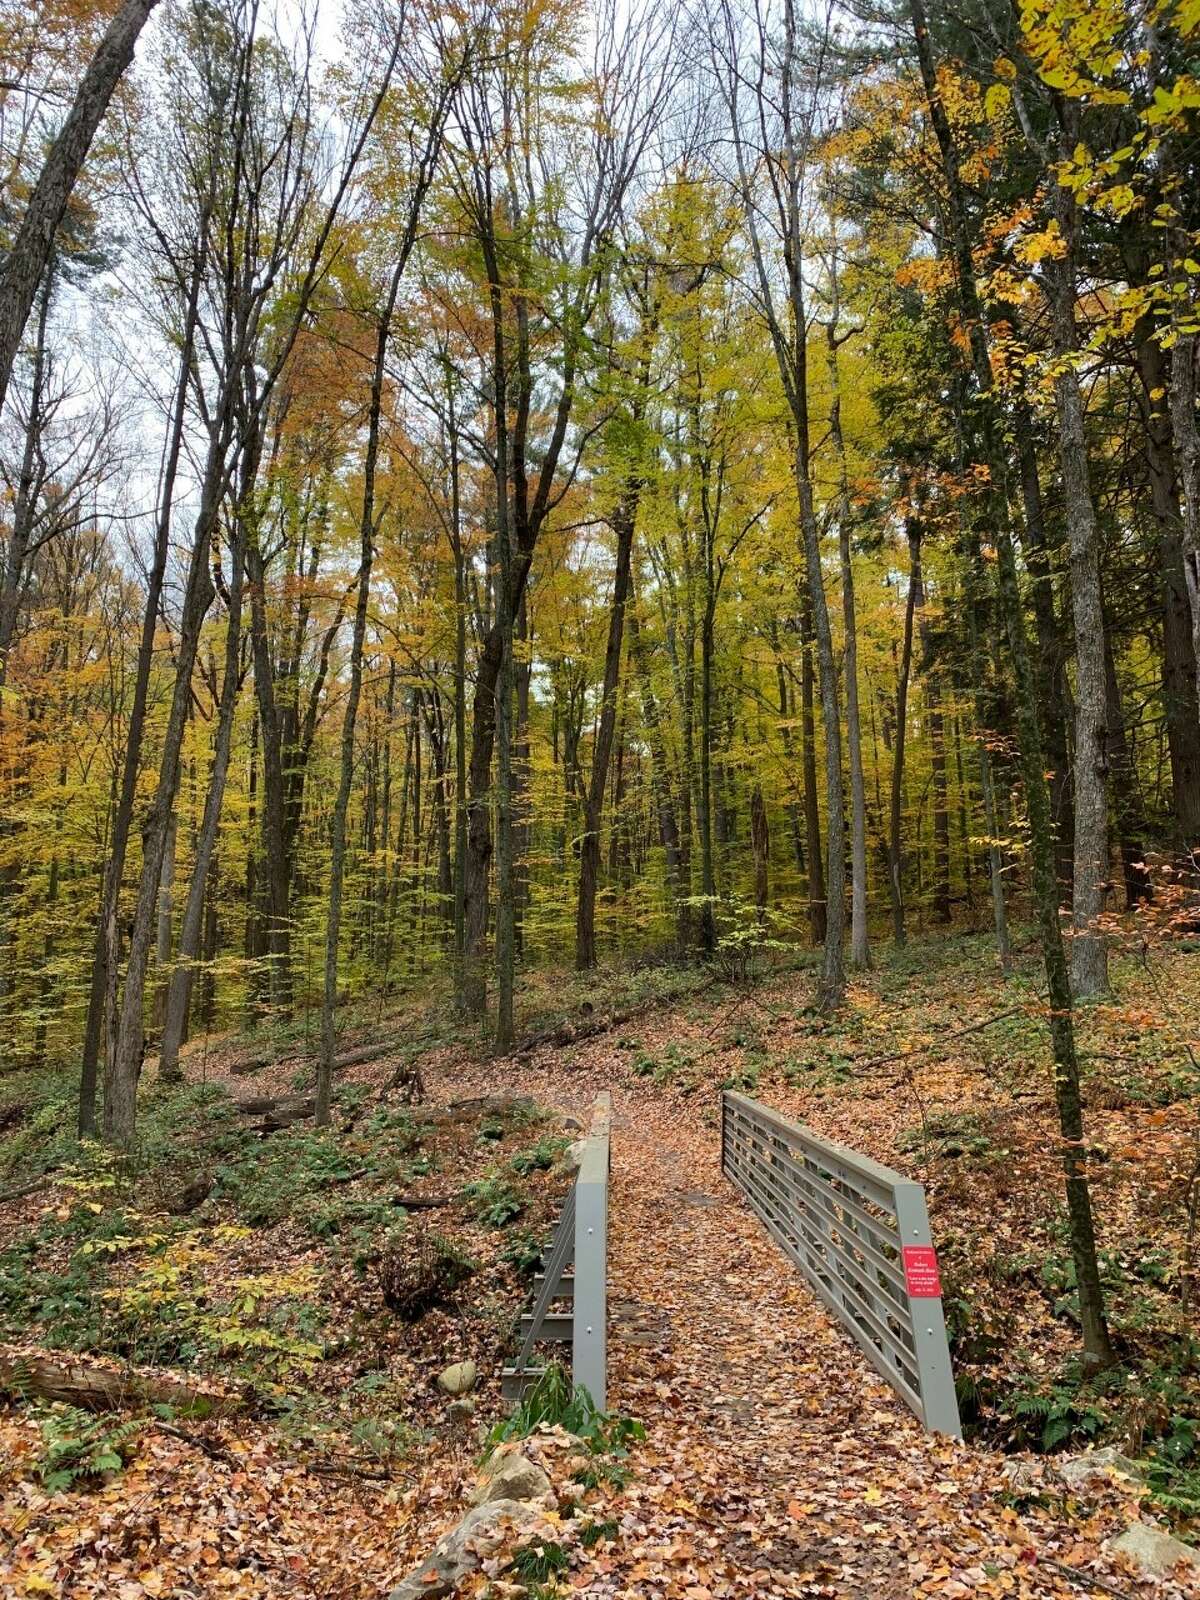 A grant from the Ice Mountain Environmental Stewardship Fund program was used to fund the construction of the Dragon Trail at Hardy Dam in 2021.